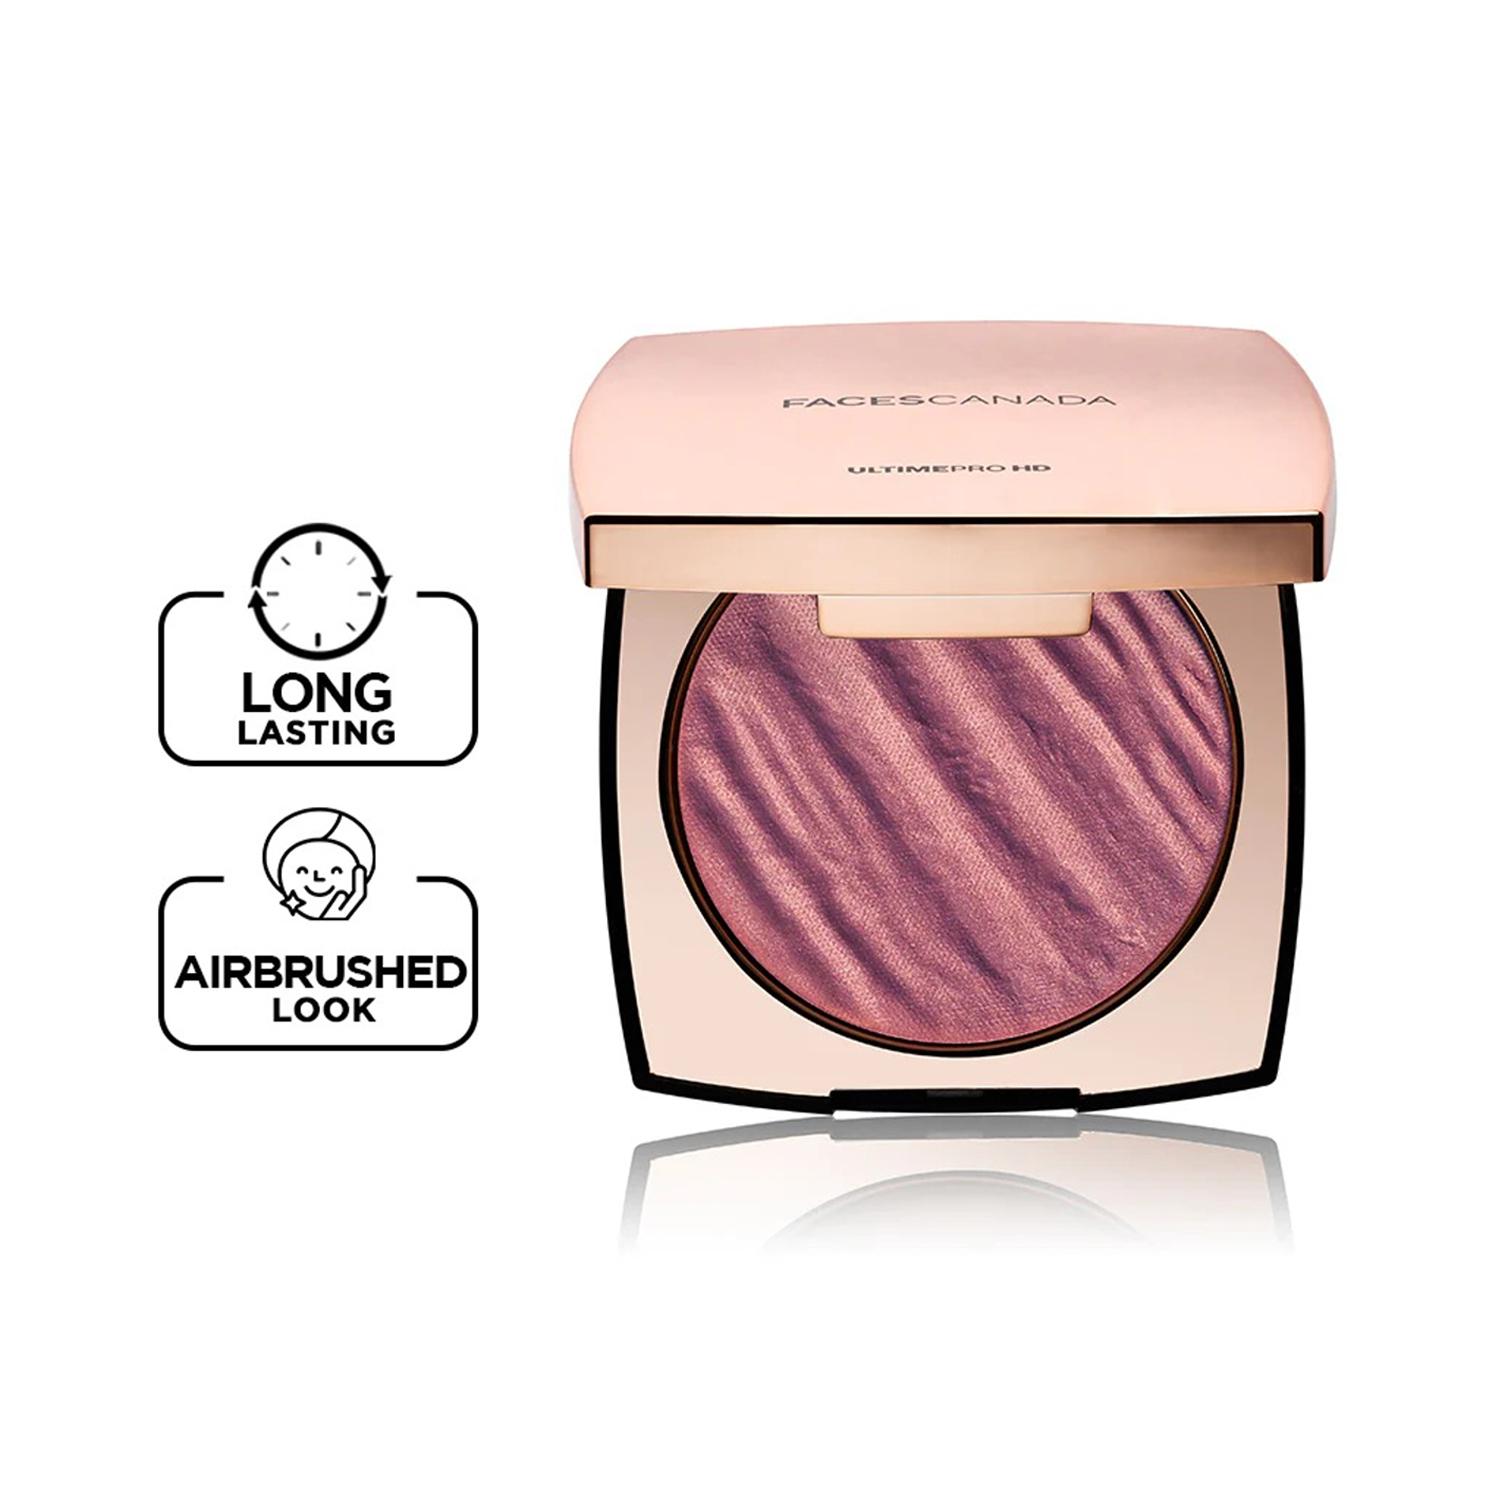 Faces Canada | Faces Canada Ultime Pro HD Lights Camera Blush - Roseate, 2-in-1 Blush & Highlighter (6.5 g)